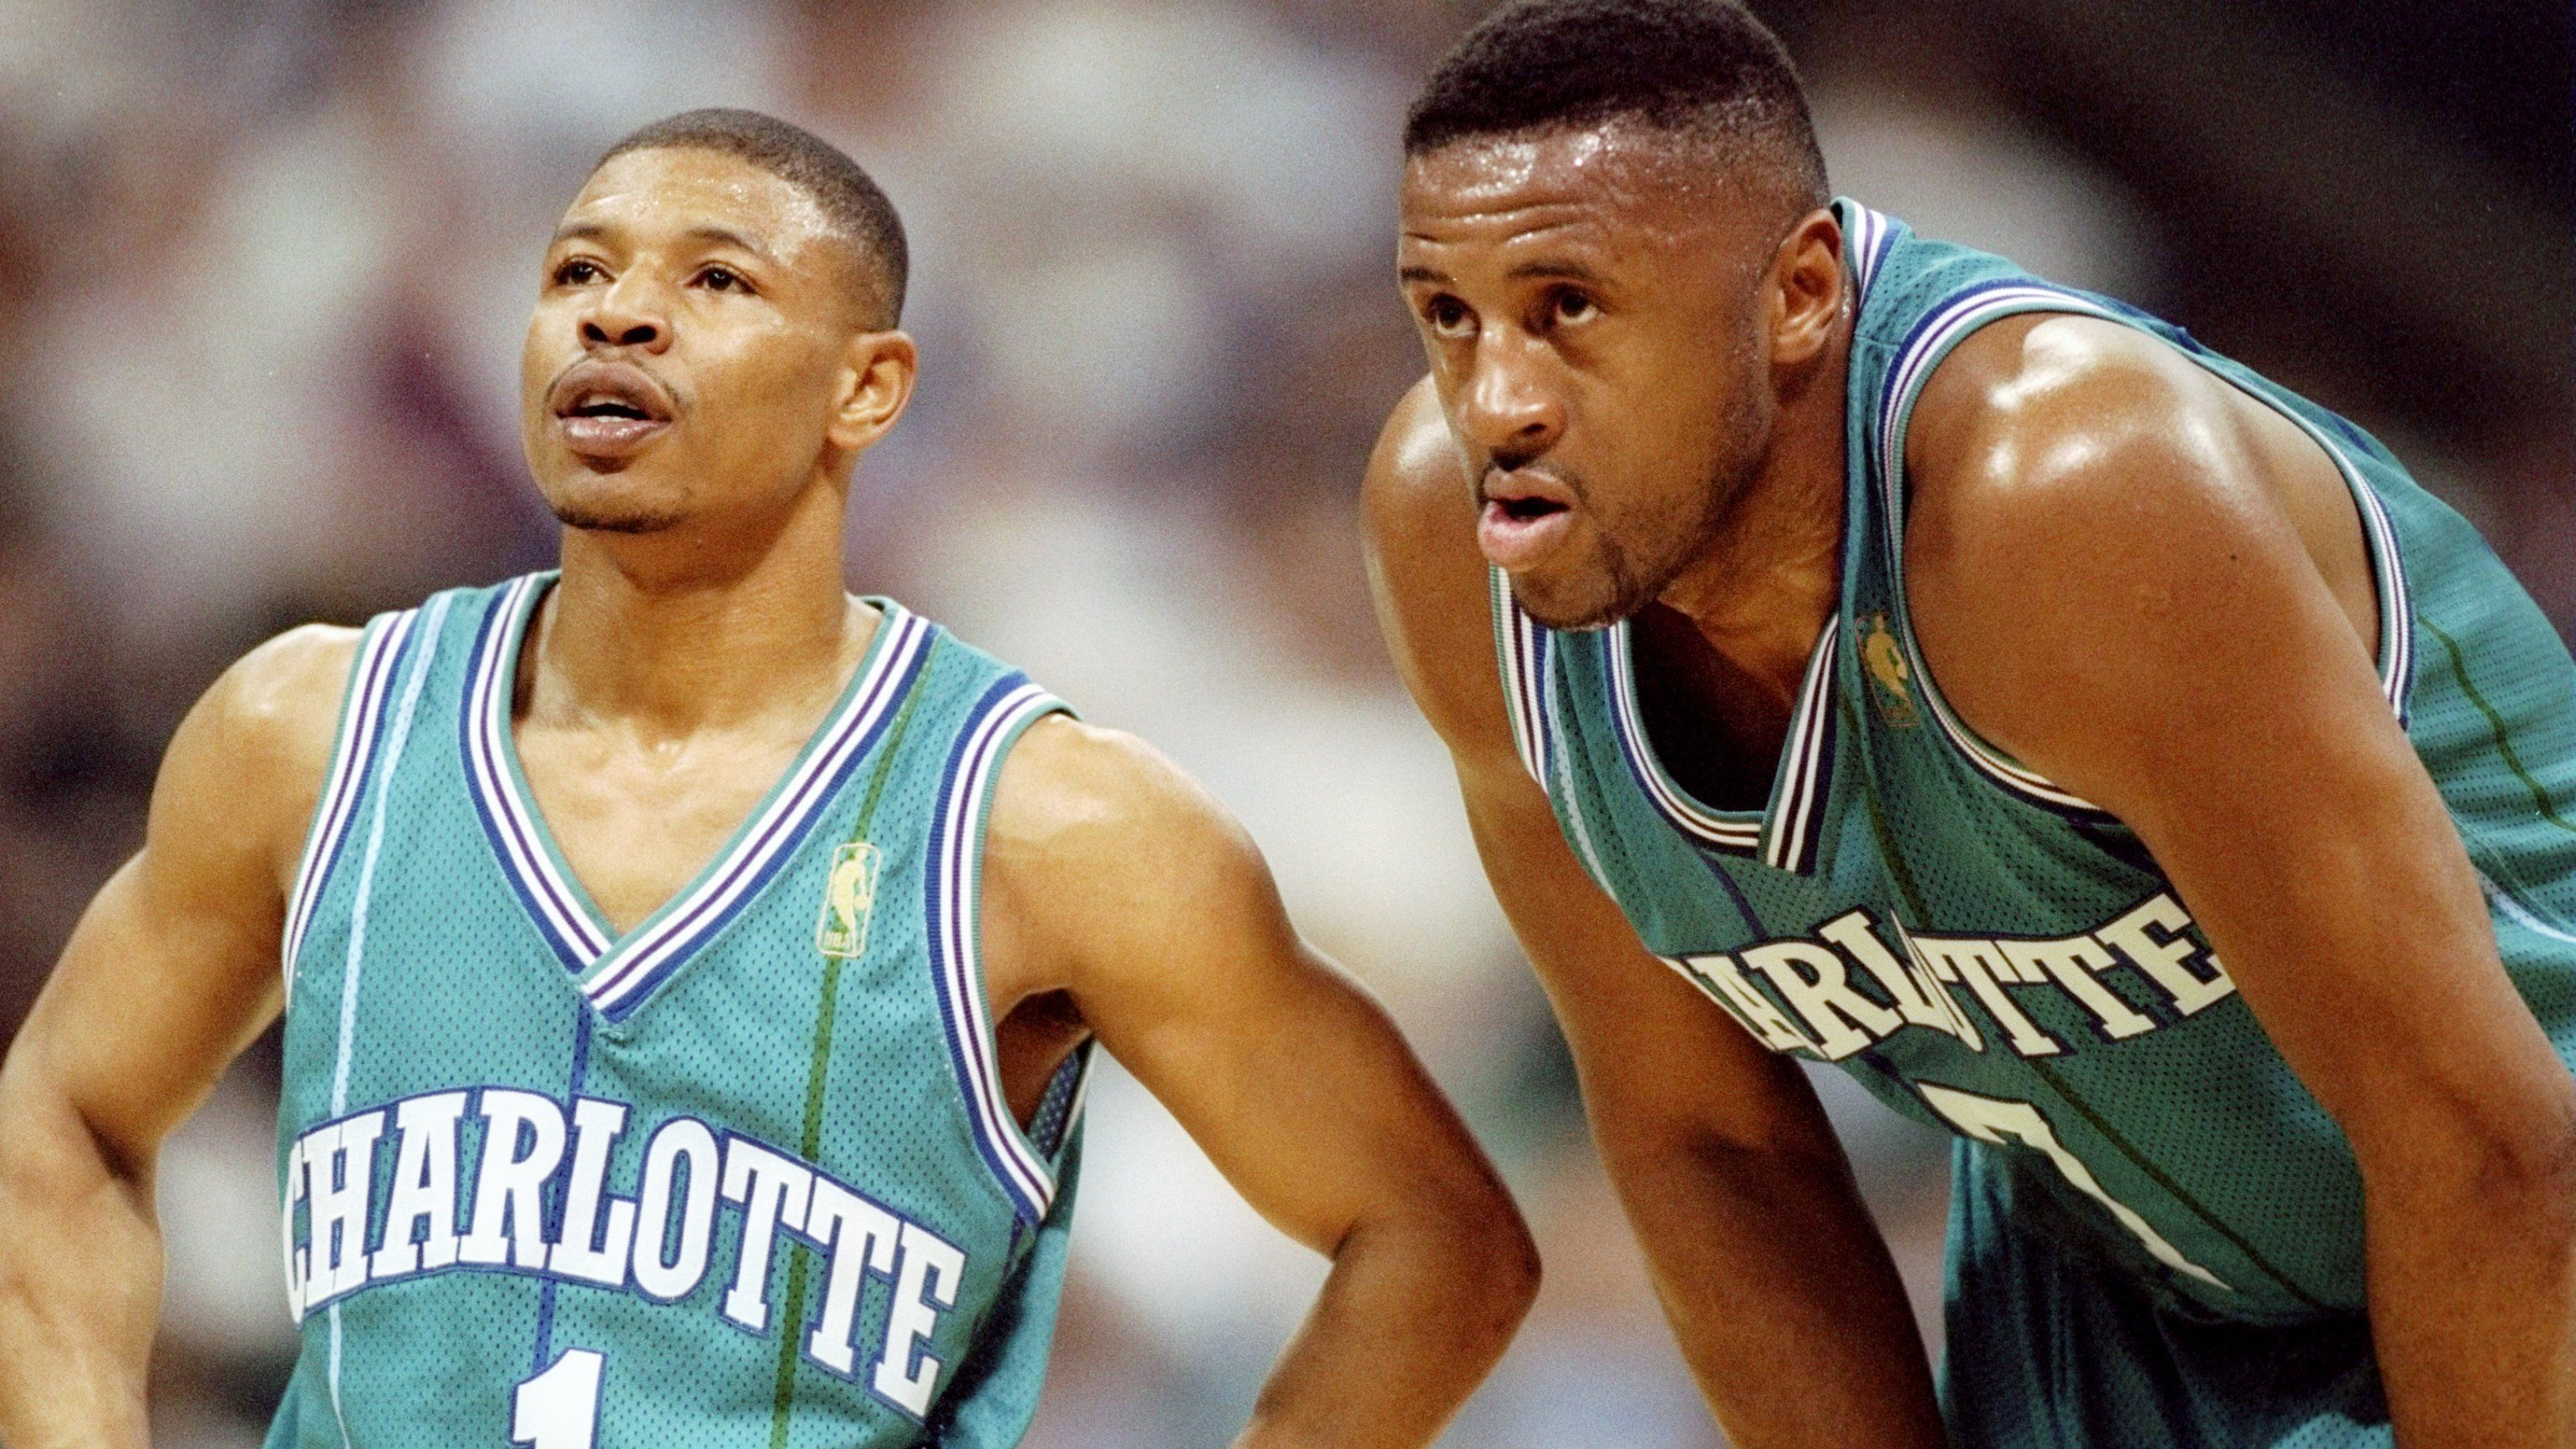 <strong>Tyrone "Muggsy" Bogues - 1,60m</strong><br><strong>Teams:</strong> Washington Bullets, Charlotte Hornets, Golden State Warriros, Toronto Raptors<br><strong>Karriere-Stats:</strong> 7,7 Punkte, 2,6 Rebounds, 7,6 Assists<br><strong>Auszeichnungen:</strong> -